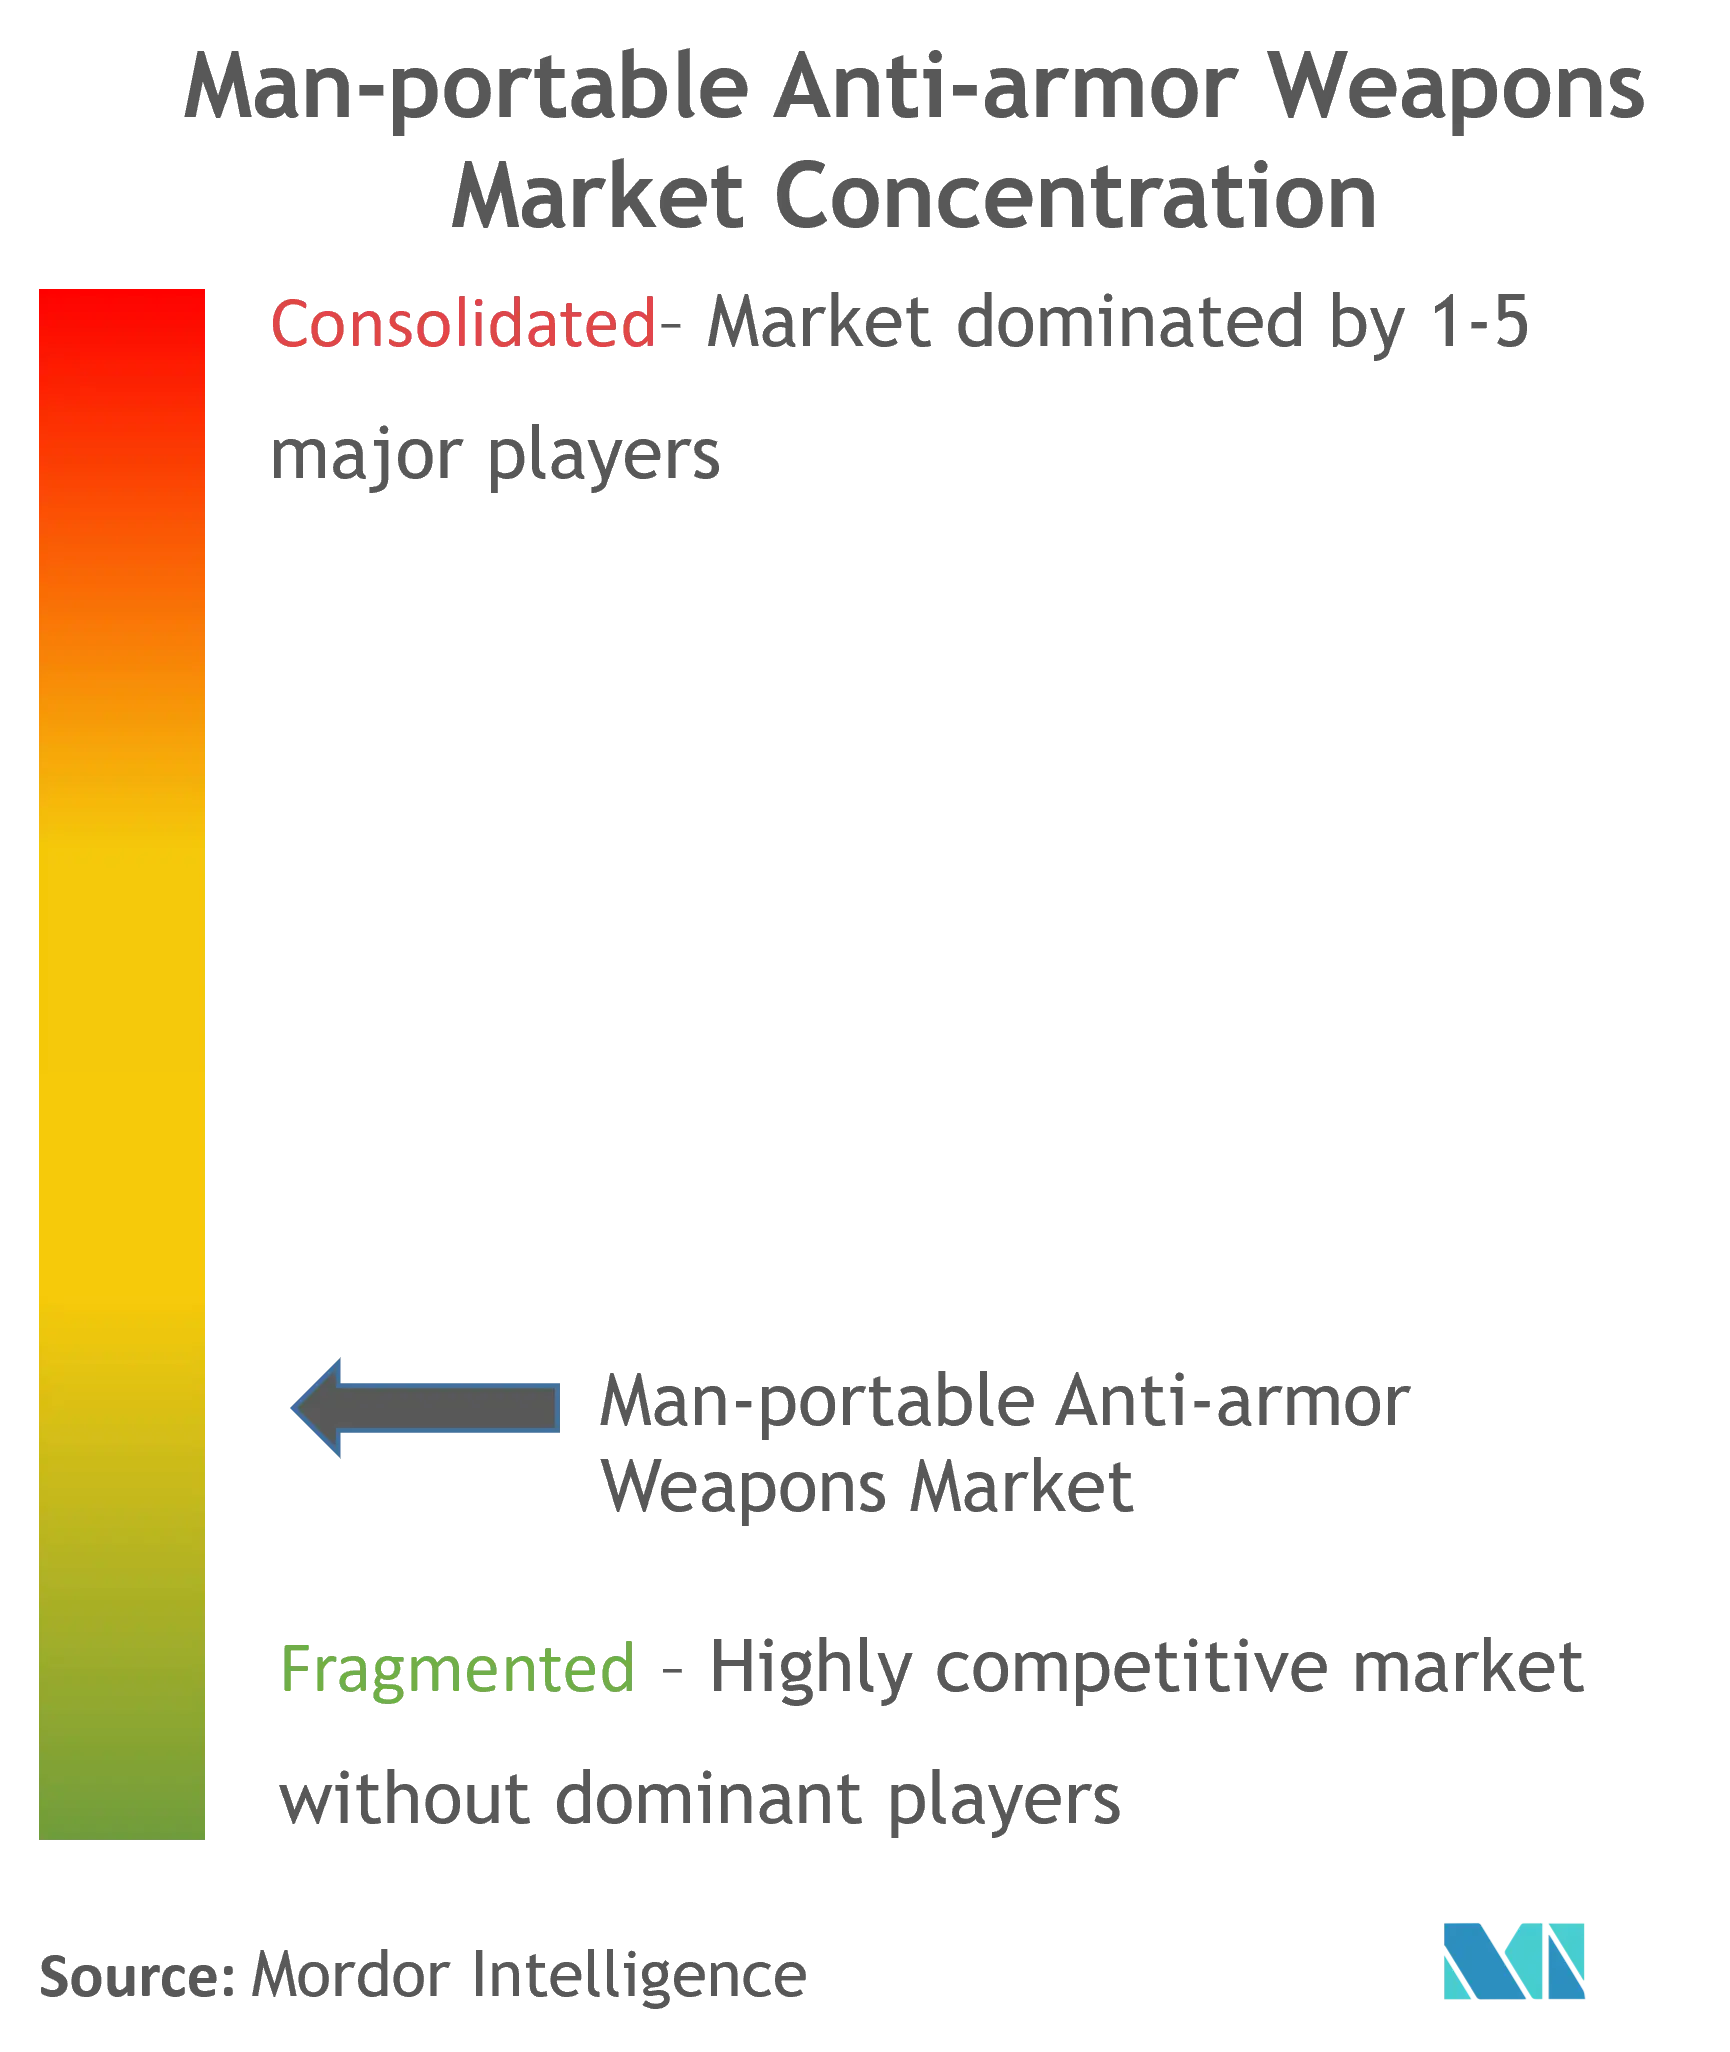 Man Portable Anti-Armor Weapons Market Concentration